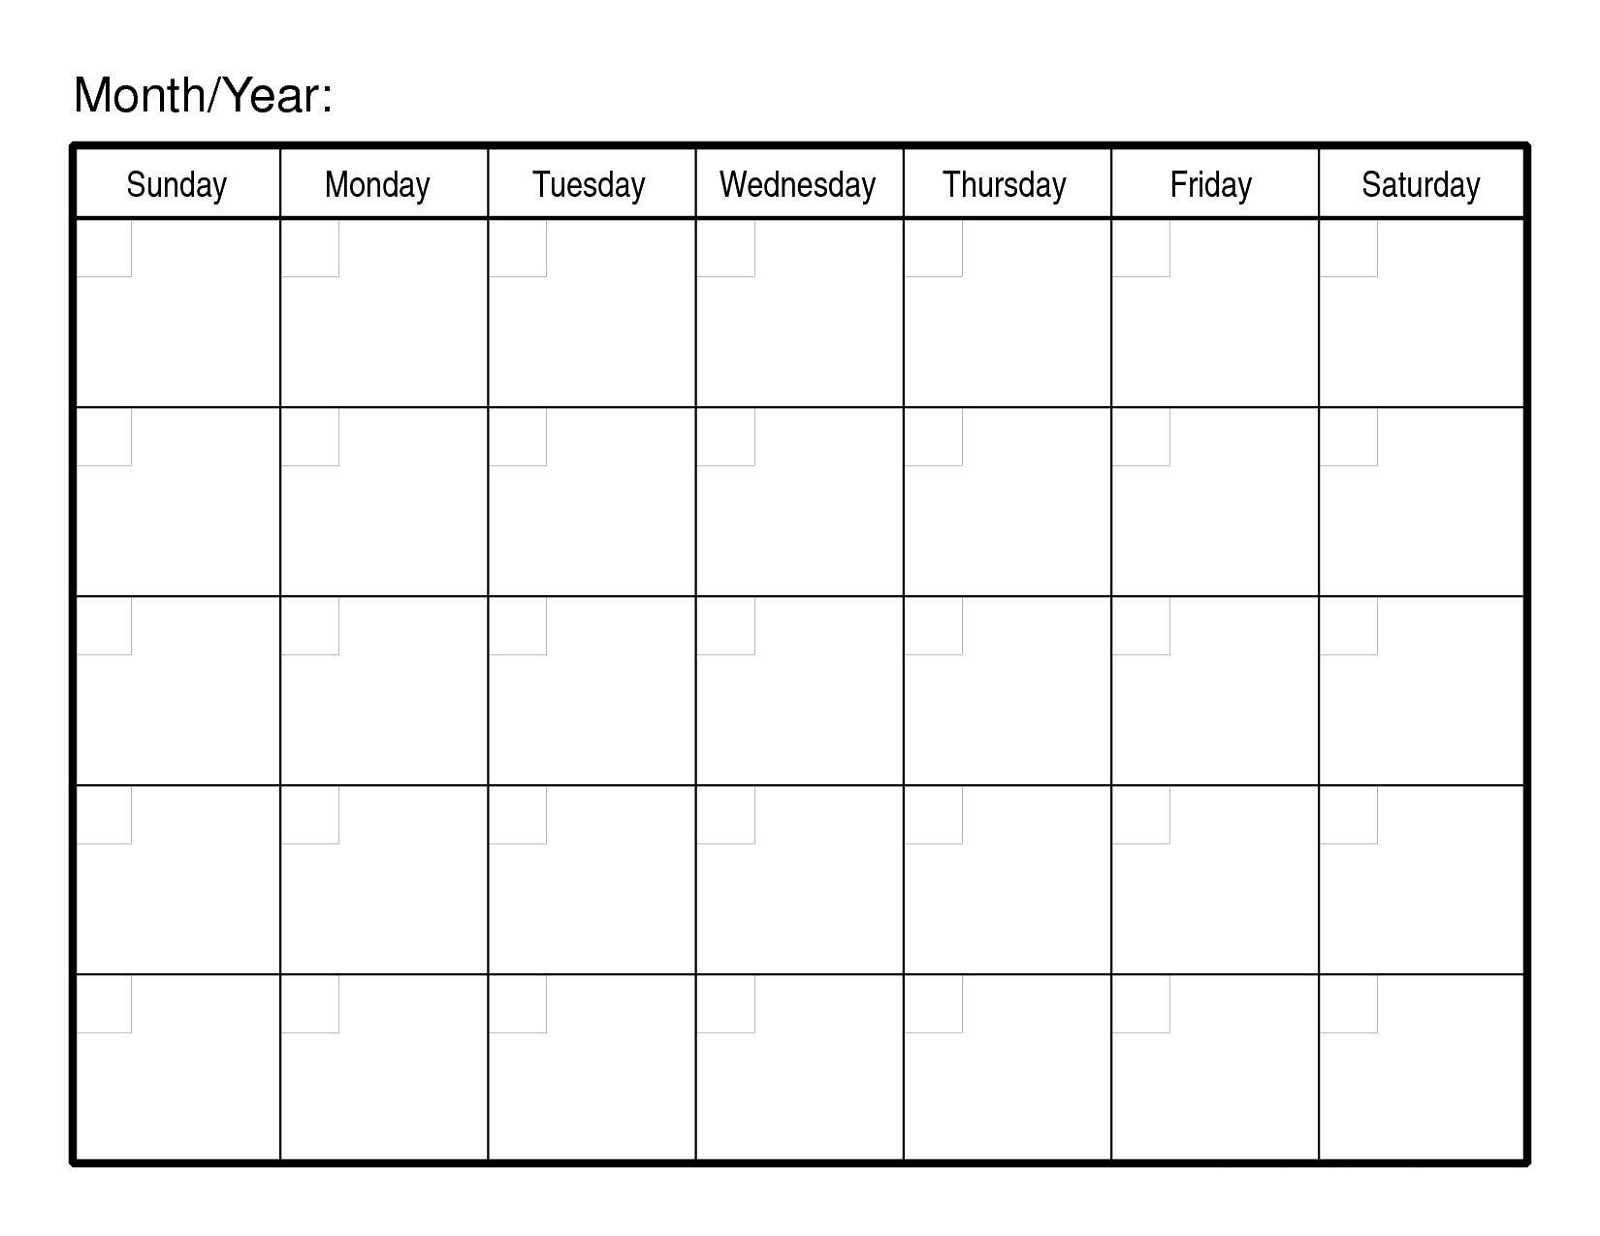 Month At A Glance Calendar Printable Blank Downloadable Intended For Month At A Glance Blank Calendar Template